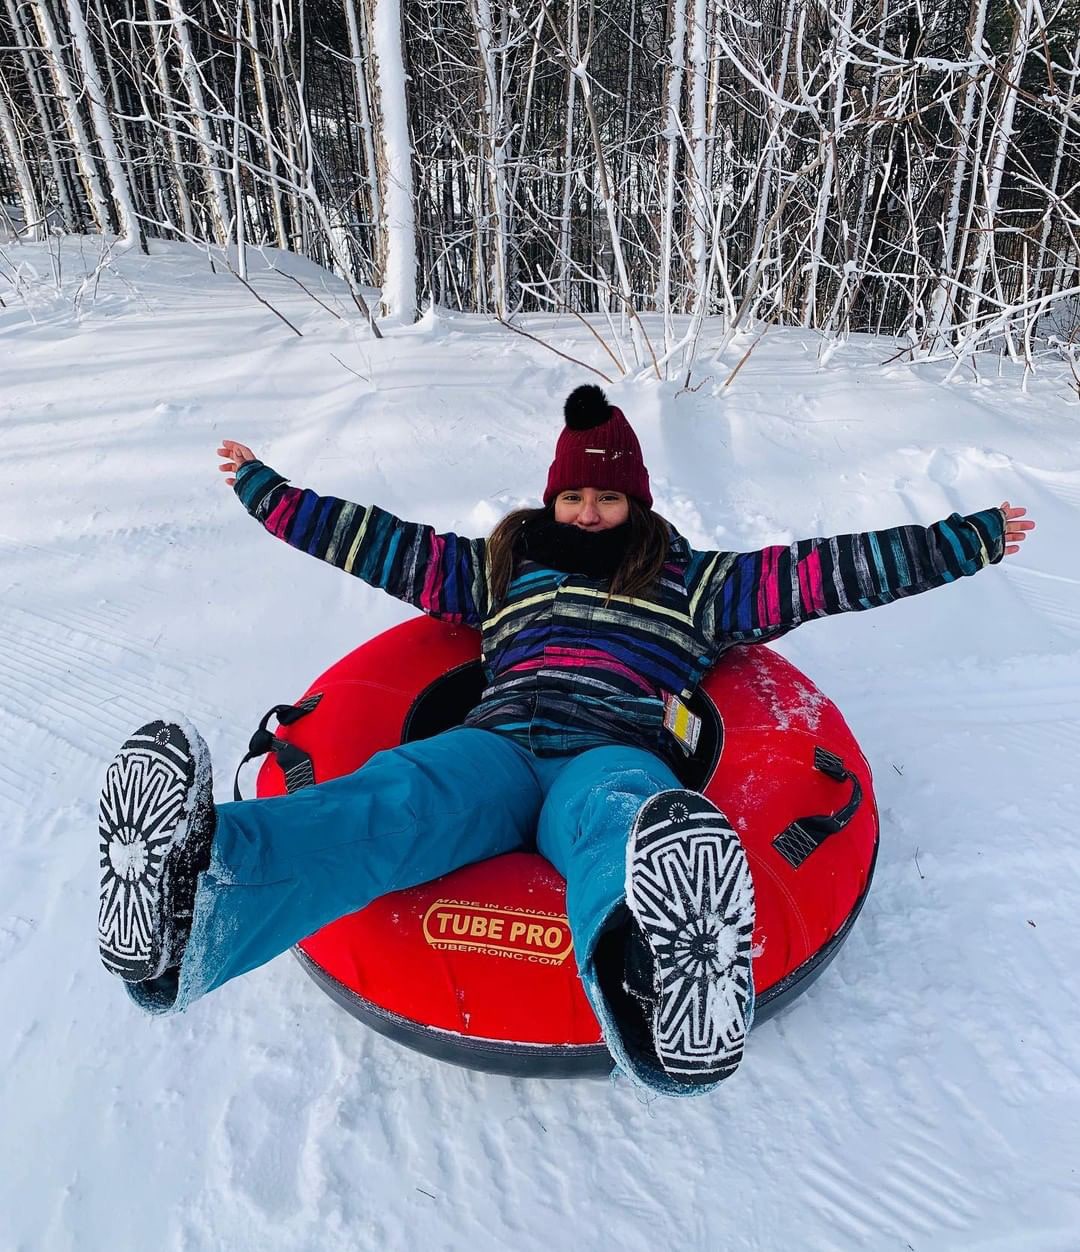  With minimal equipment and no skill level needed, tubing is an easy winter sport fit for young and old alike. Just be sure to do it on snow slopes designed for tubing. 